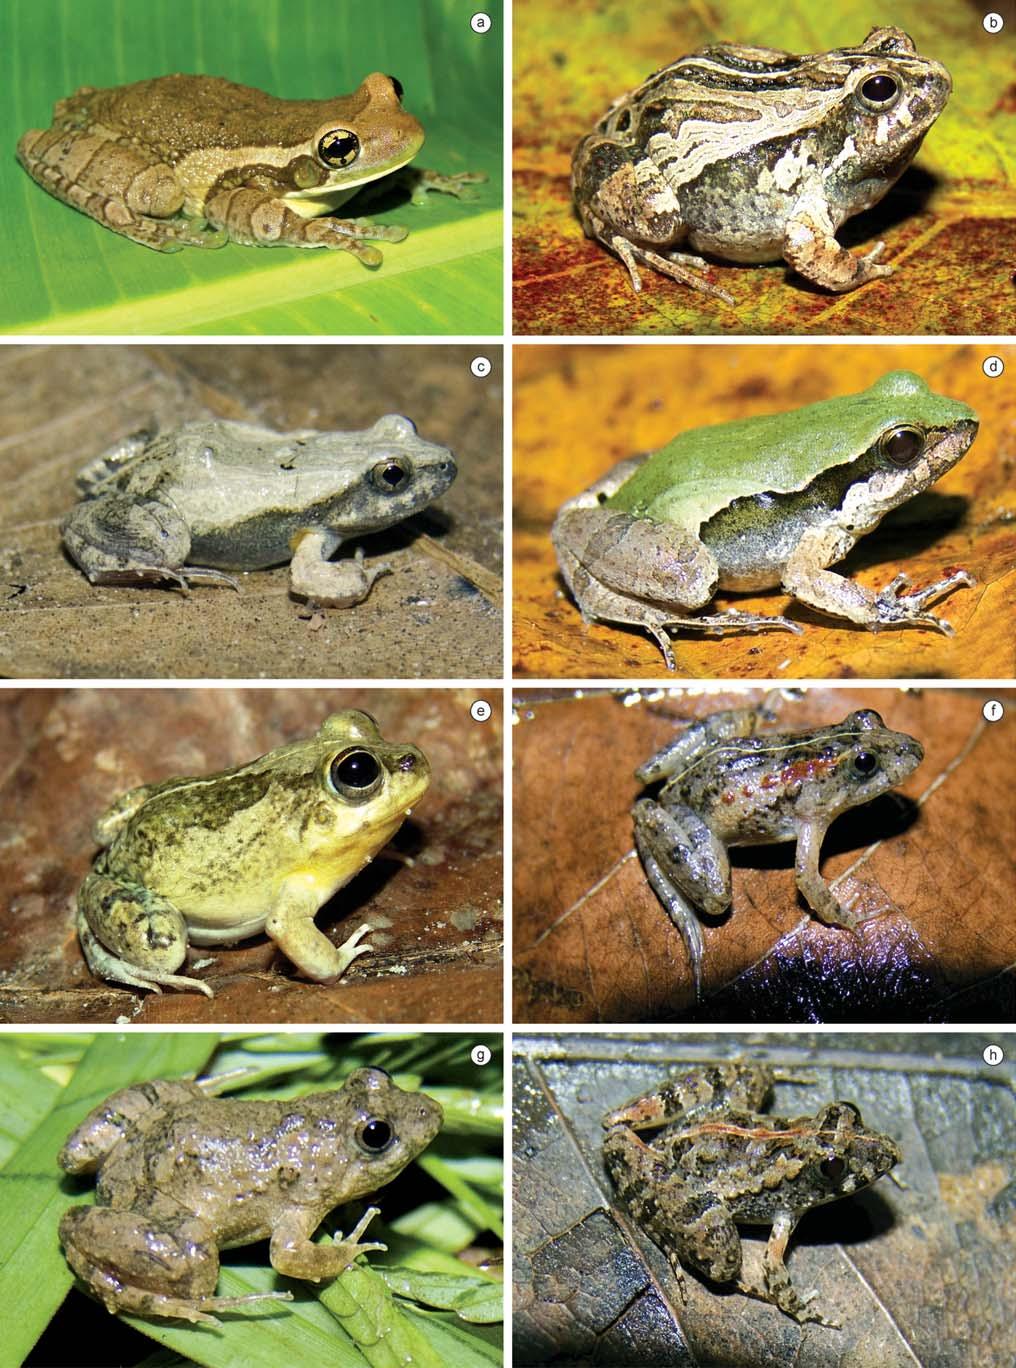 Biota Neotrop., vol. 10, no. 3 235 Amphibians and reptiles from a highly diverse area of the Caatinga domain Figure 5. Amphibian species found in the region of CPI.